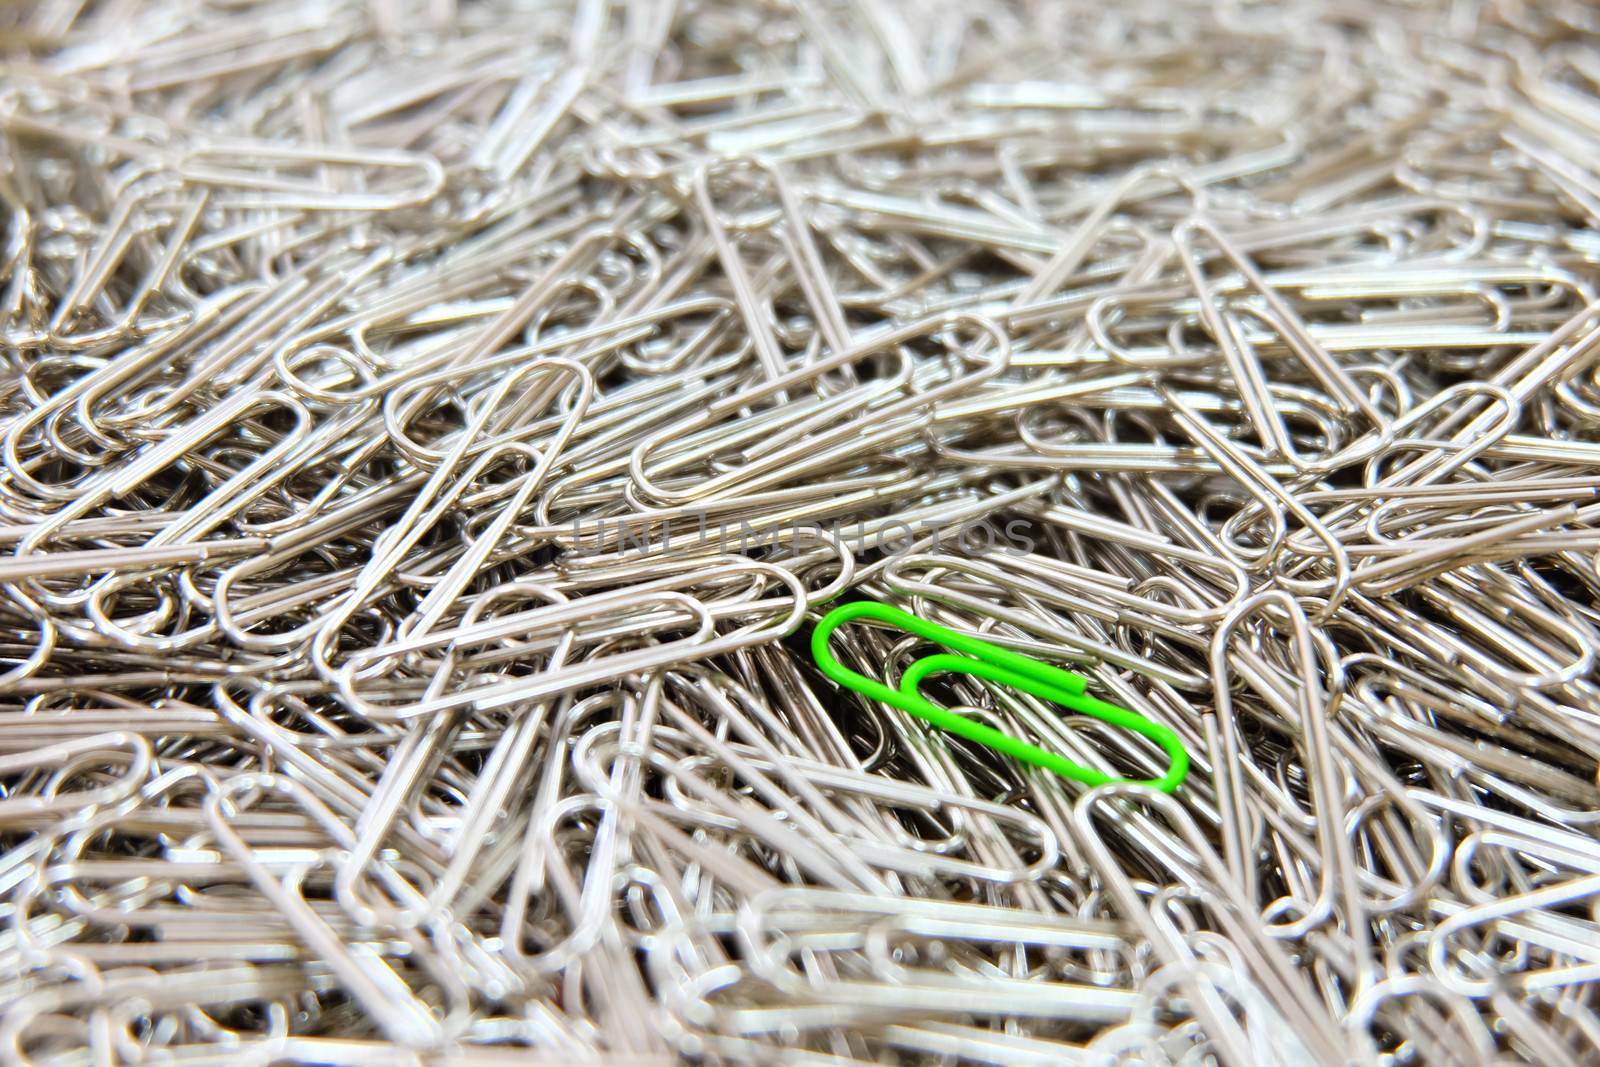 Green paper clip on multiple paper clips background.